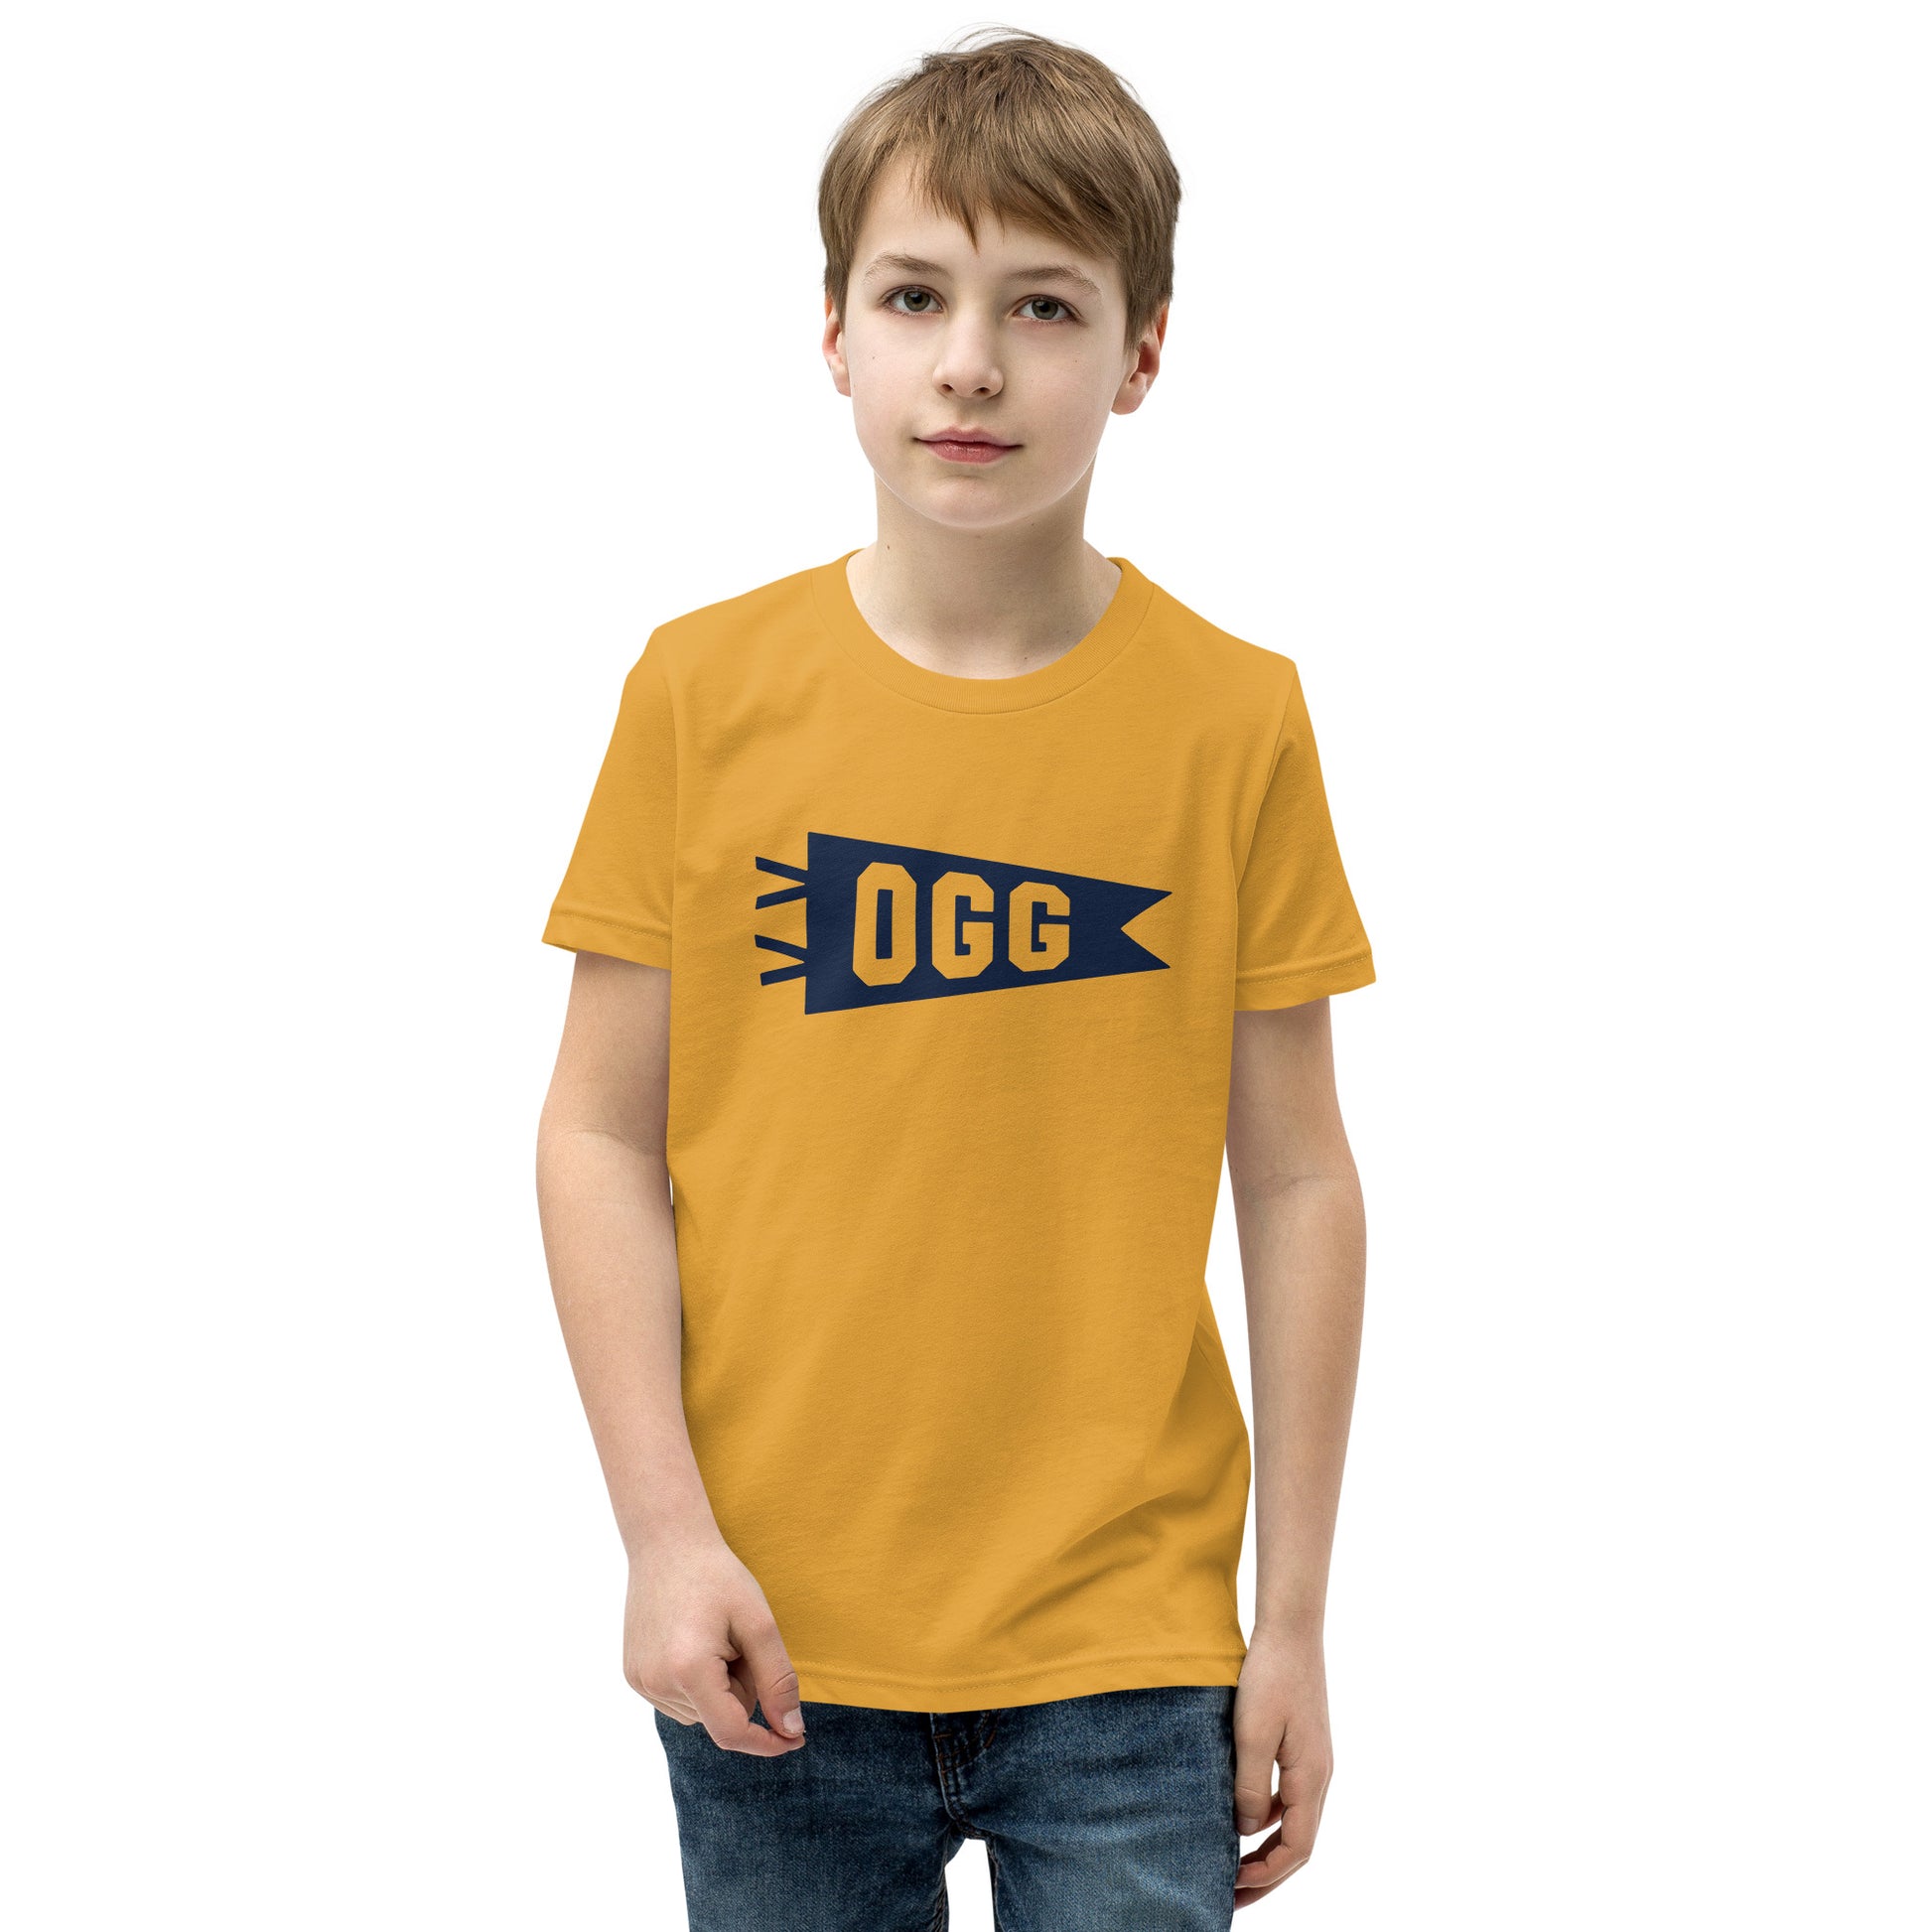 Kid's Airport Code Tee - Navy Blue Graphic • OGG Maui • YHM Designs - Image 08